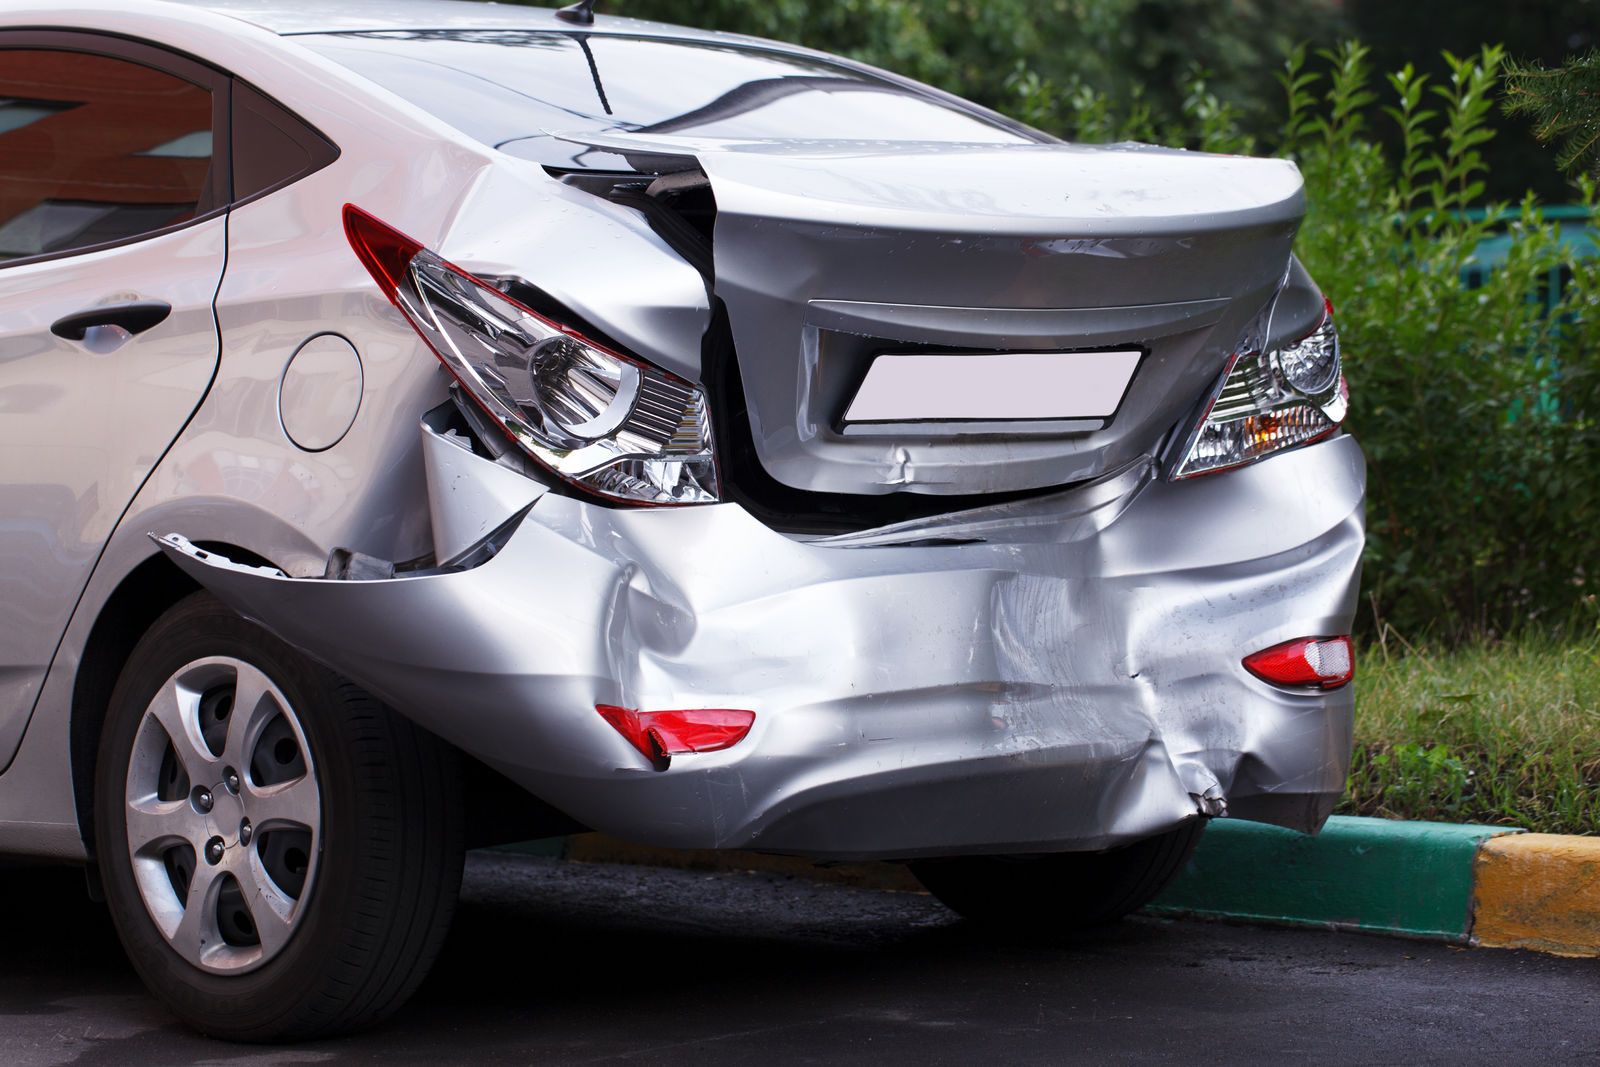 Does Car Insurance cover a Hit And Run Accident?